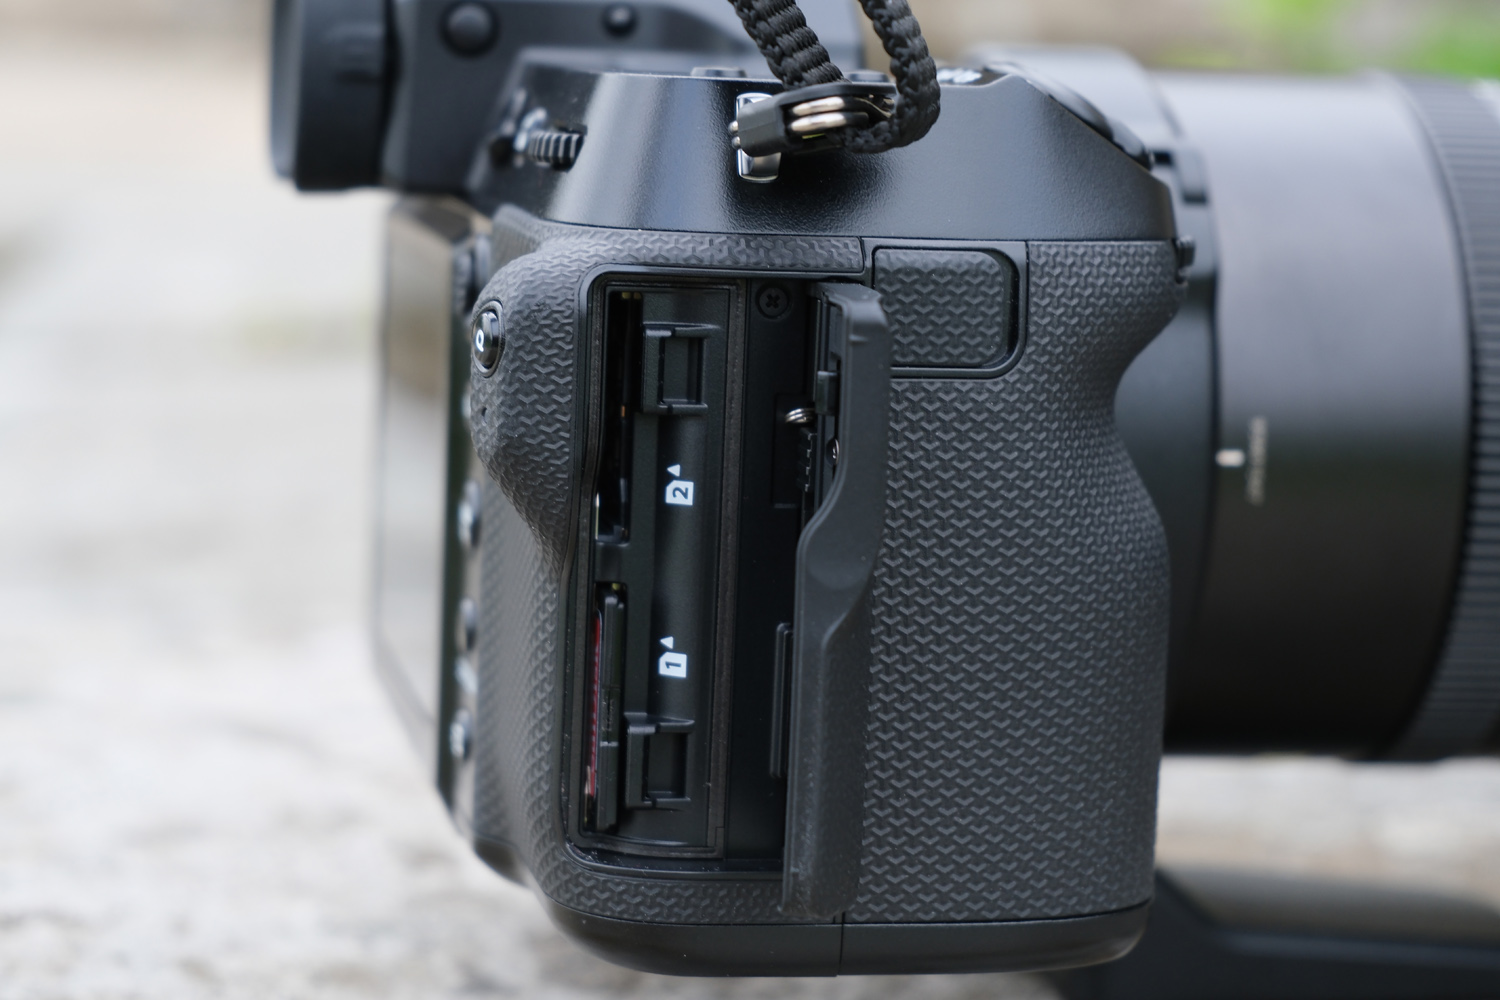 Fujifilm GFX100s II hands-on review card slots